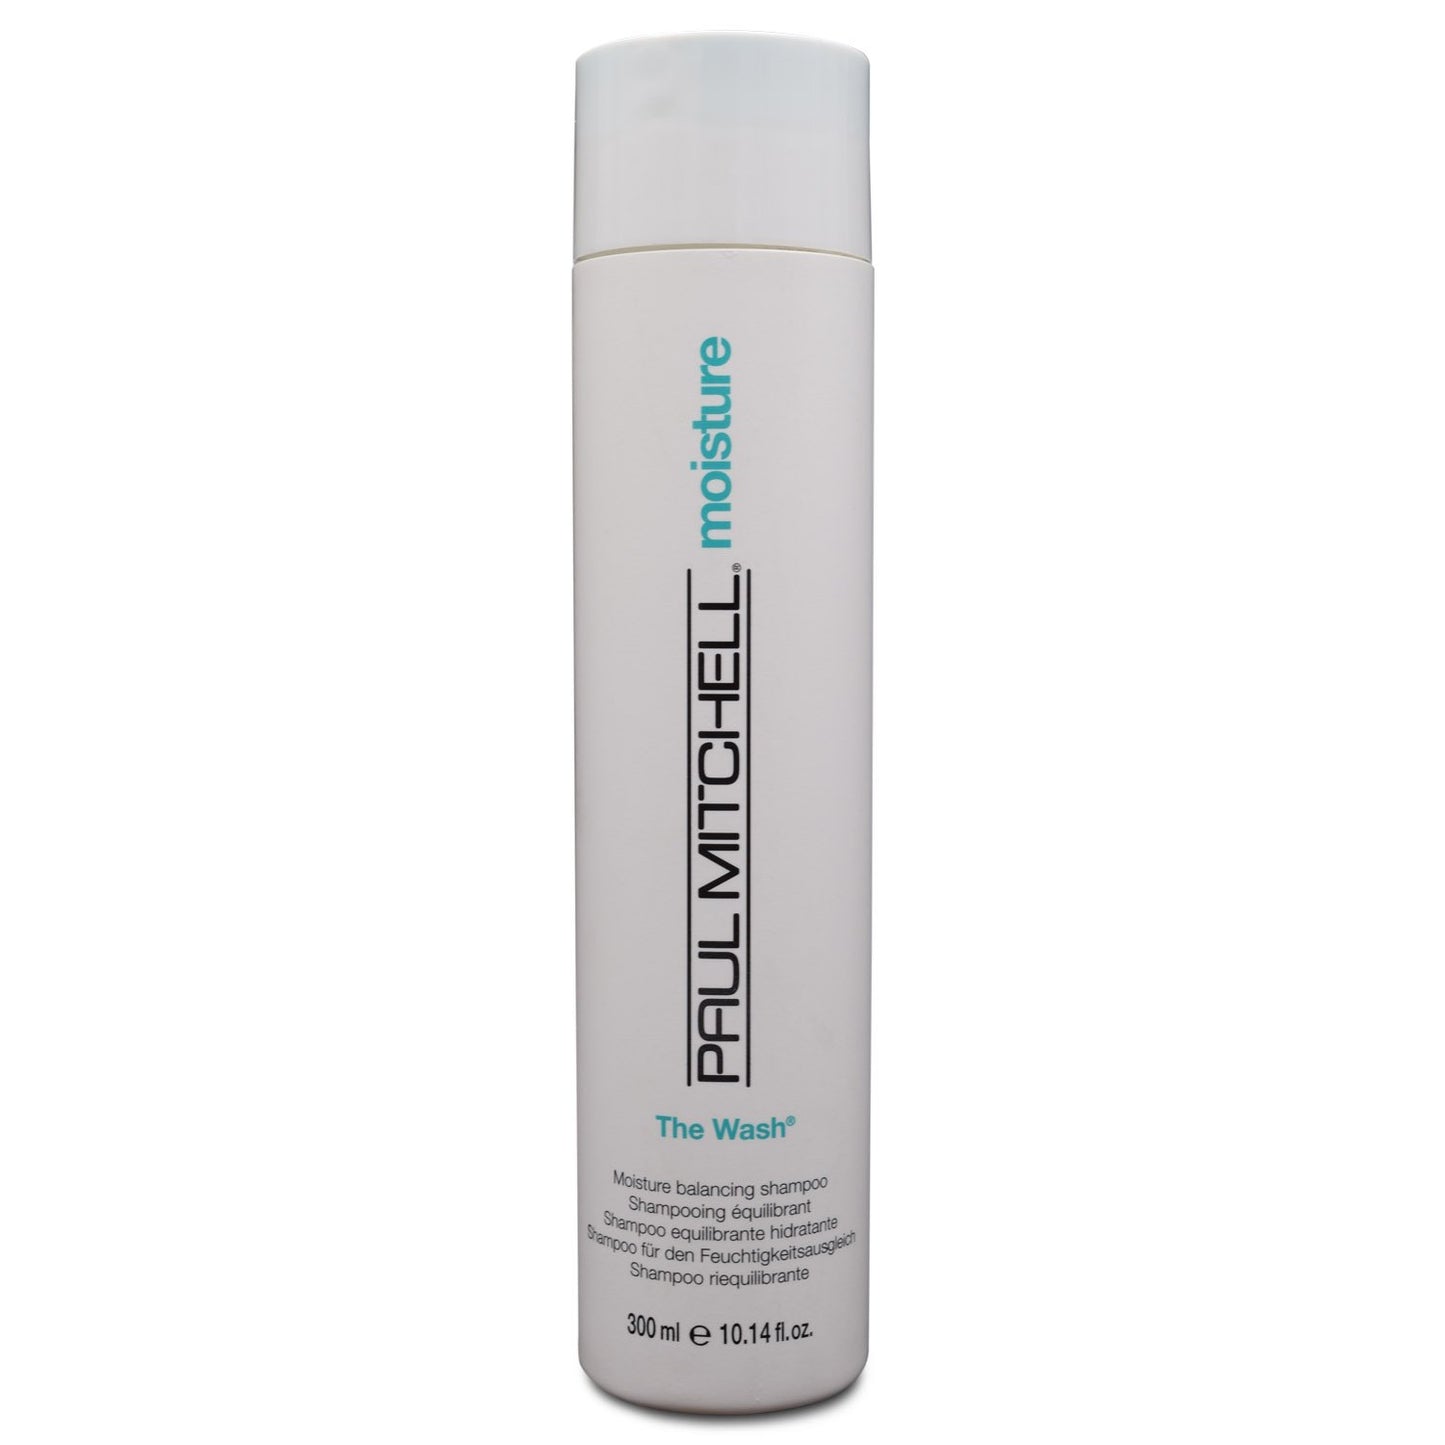 PAUL MITCHELL THE RINSE BALANCING CONDITIONER 10.14 OZ 11360Hair ConditionerPAUL MITCHELL